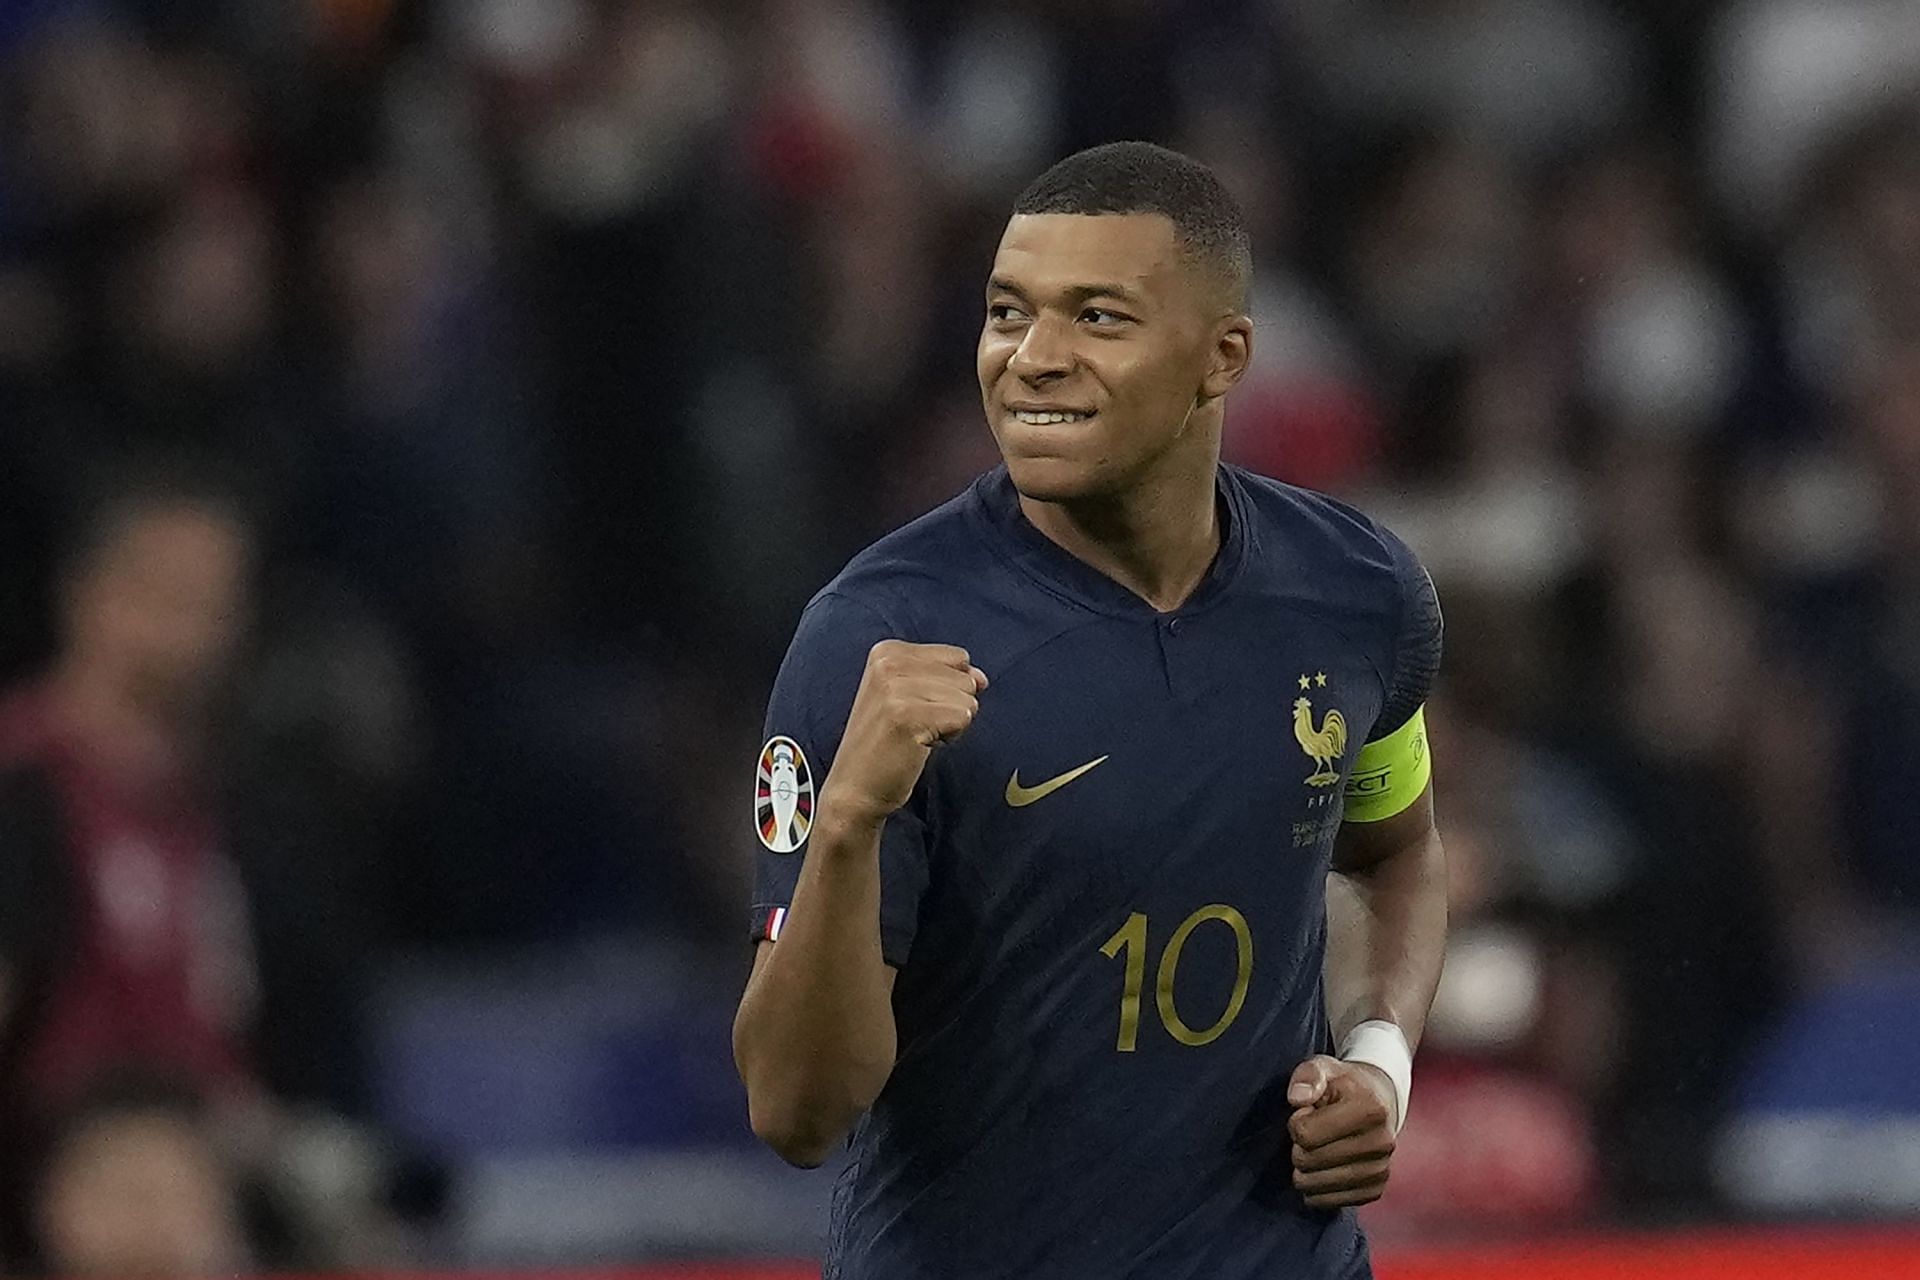 Mbappe faces crucial talks with the club over his future.